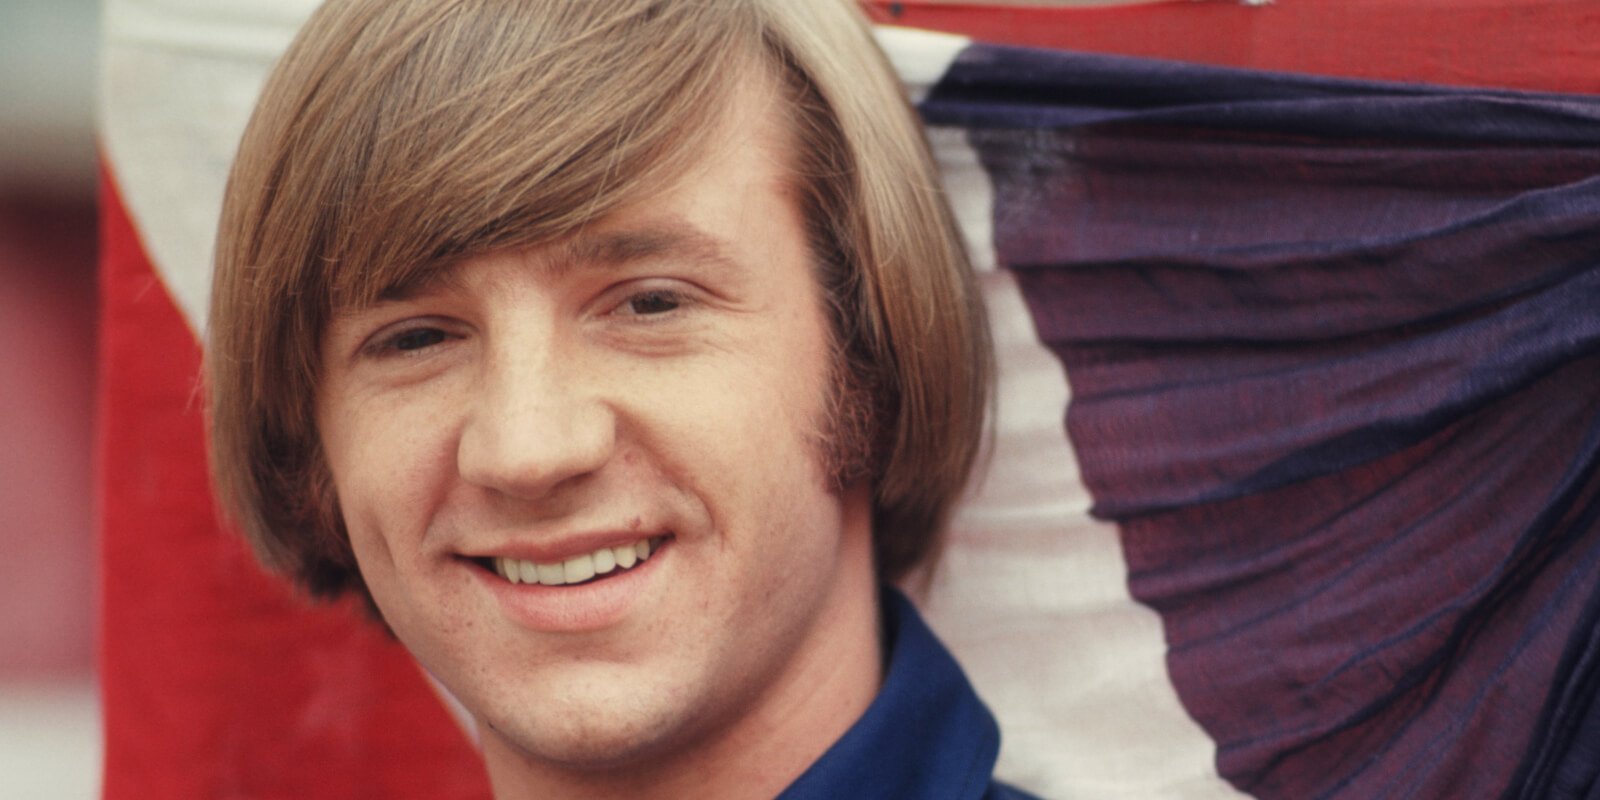 Peter Tork of The Monkees was photographed in June 1967.